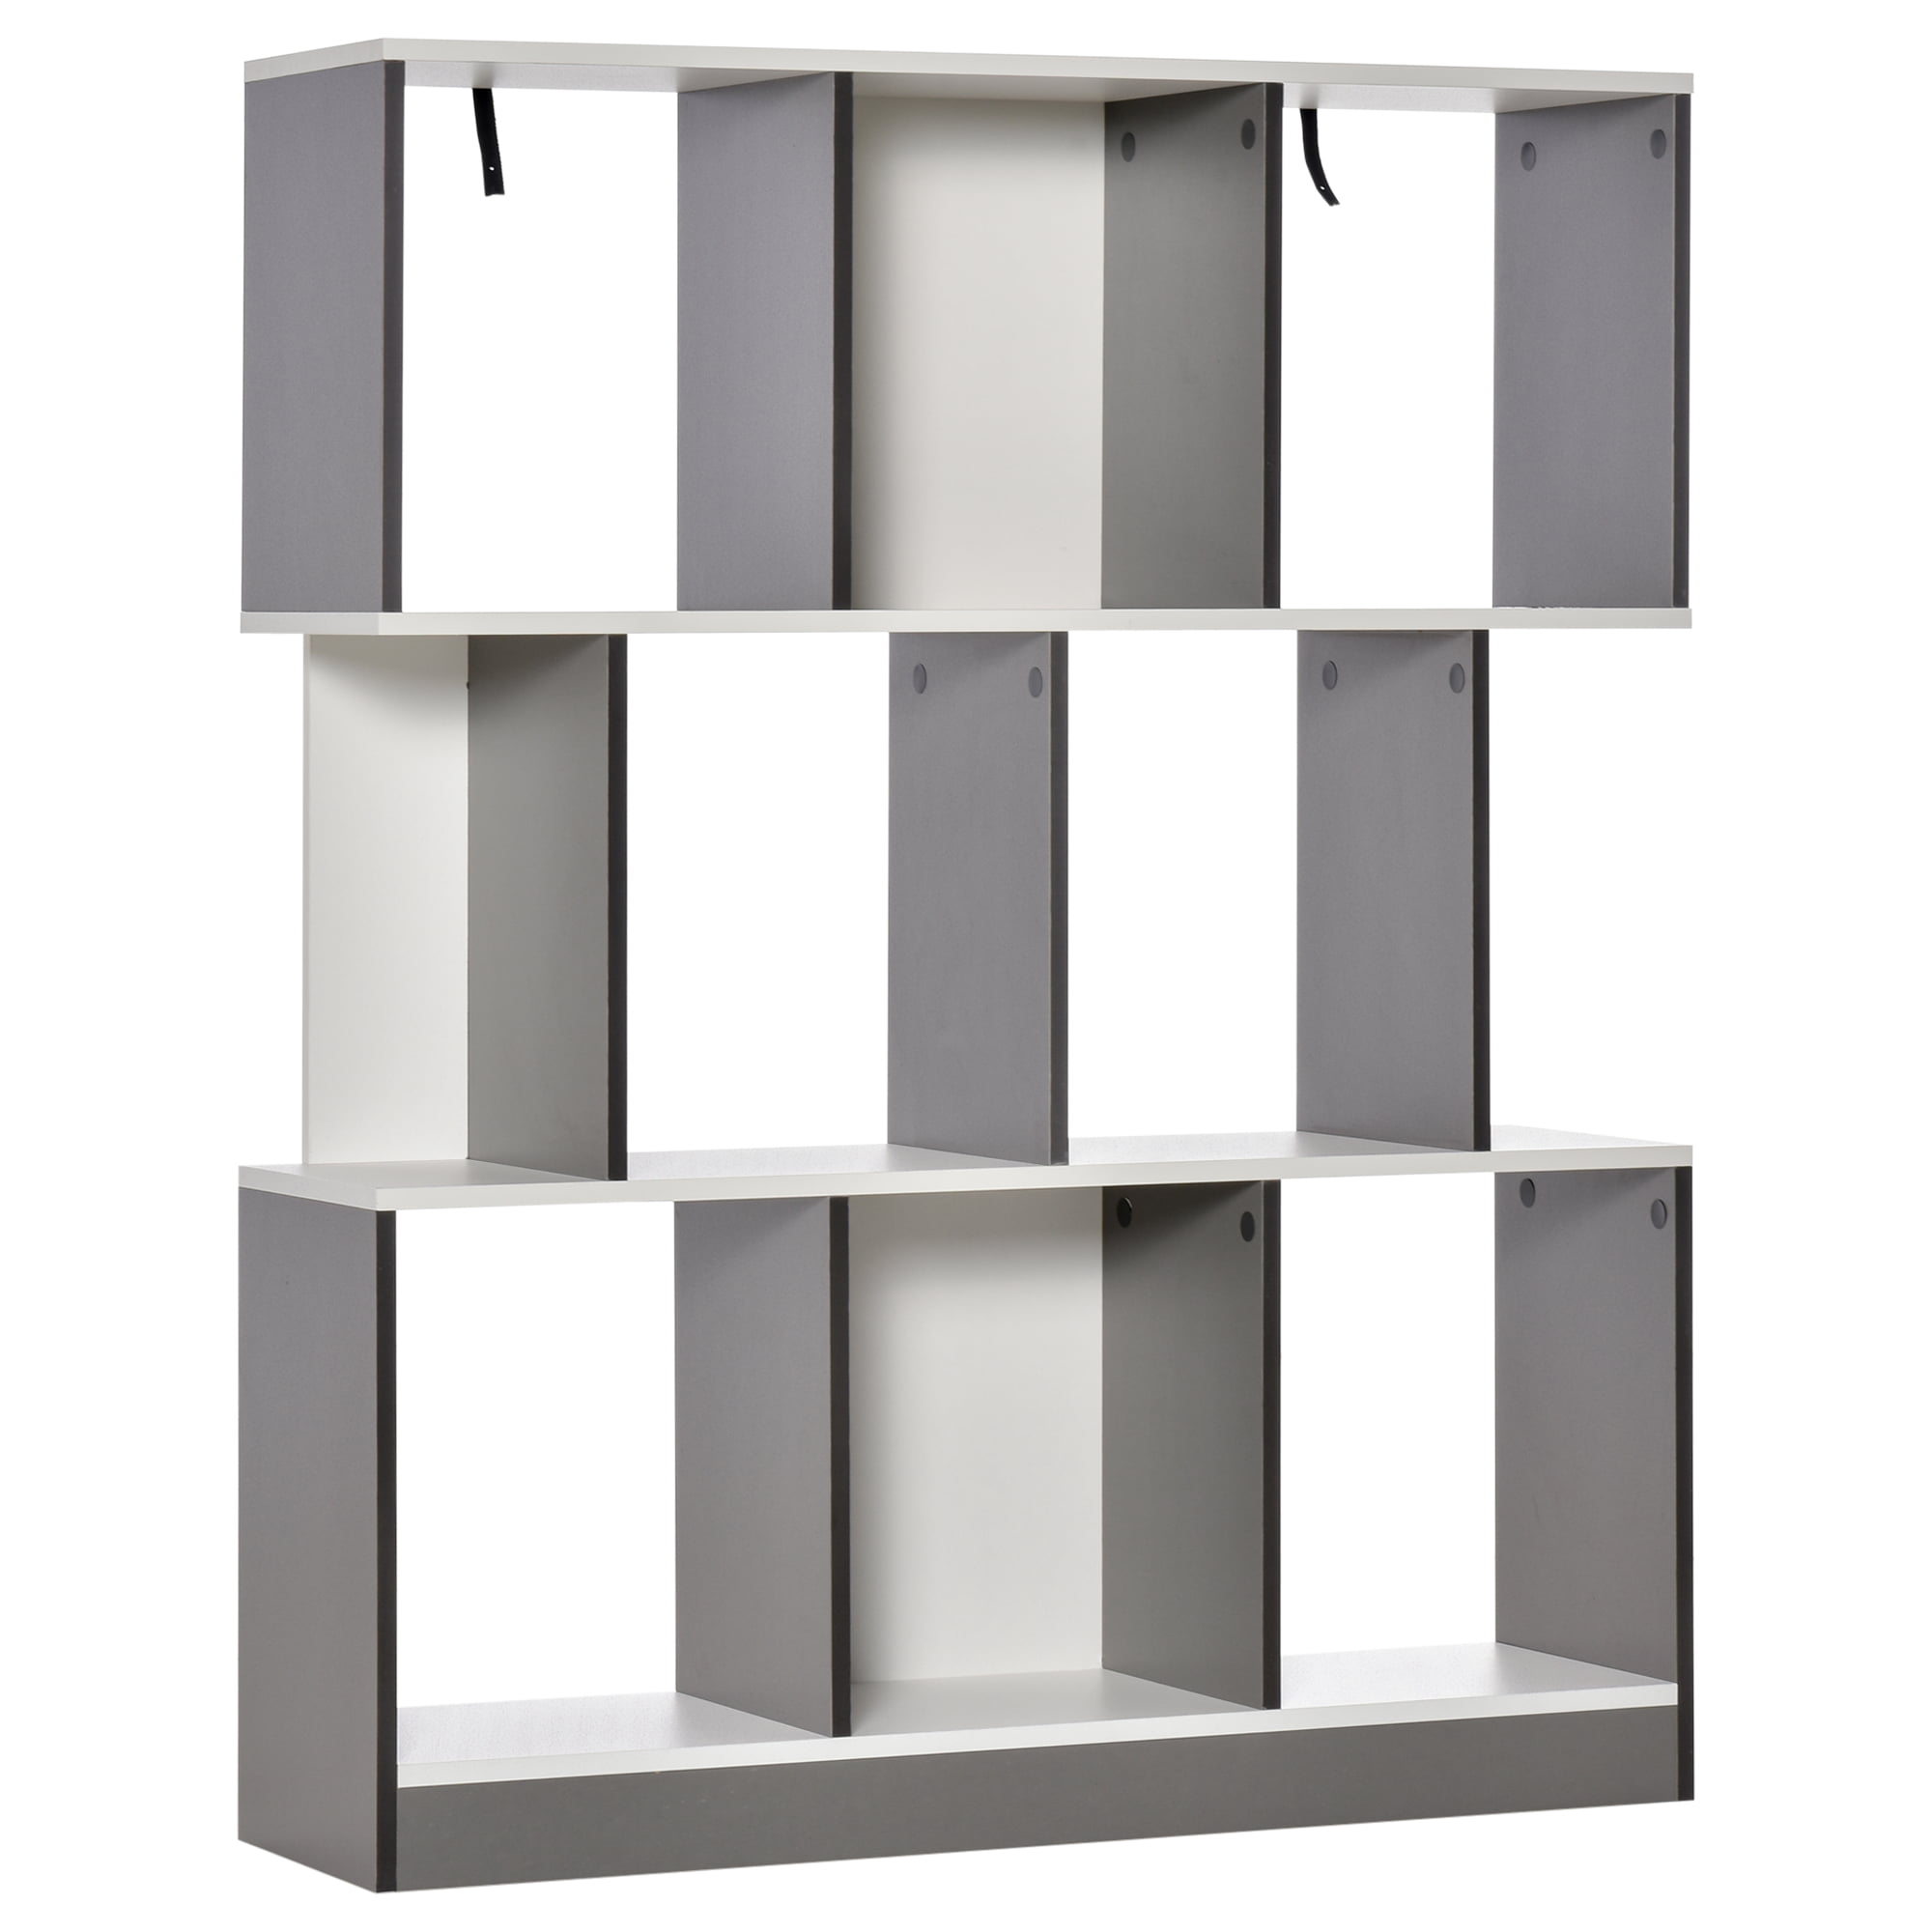 4 Tier Wooden Bookcase 16 Cube Bookshelf Free Standing Divider Display Shelving Unit Storage Rack for Home Office Office Living Room White 